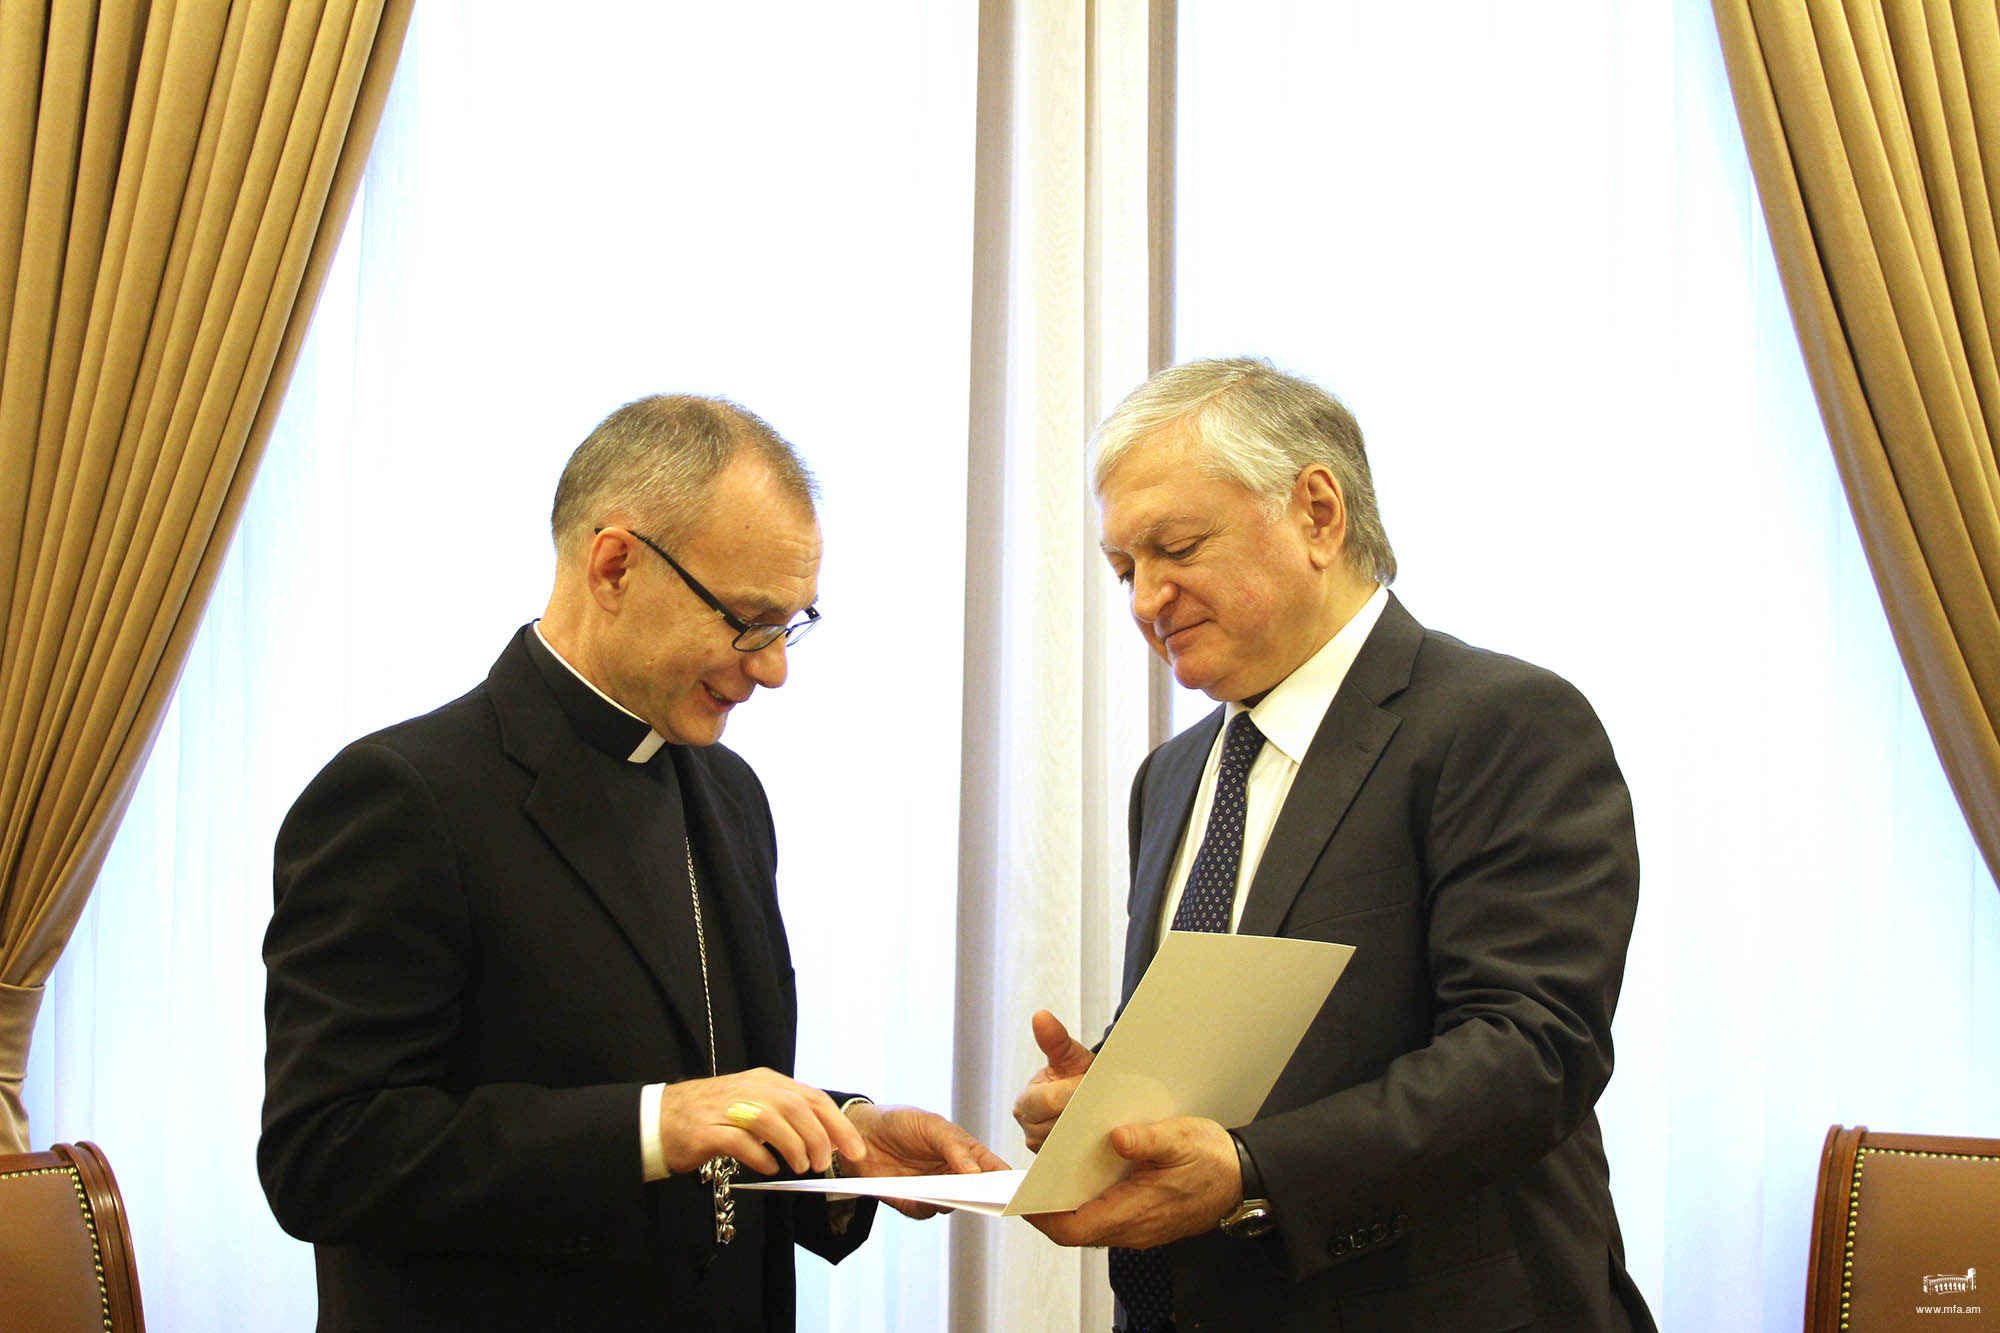 Nuncio of the Holy See to Armenia was awarded with the MFA Medal of Honour